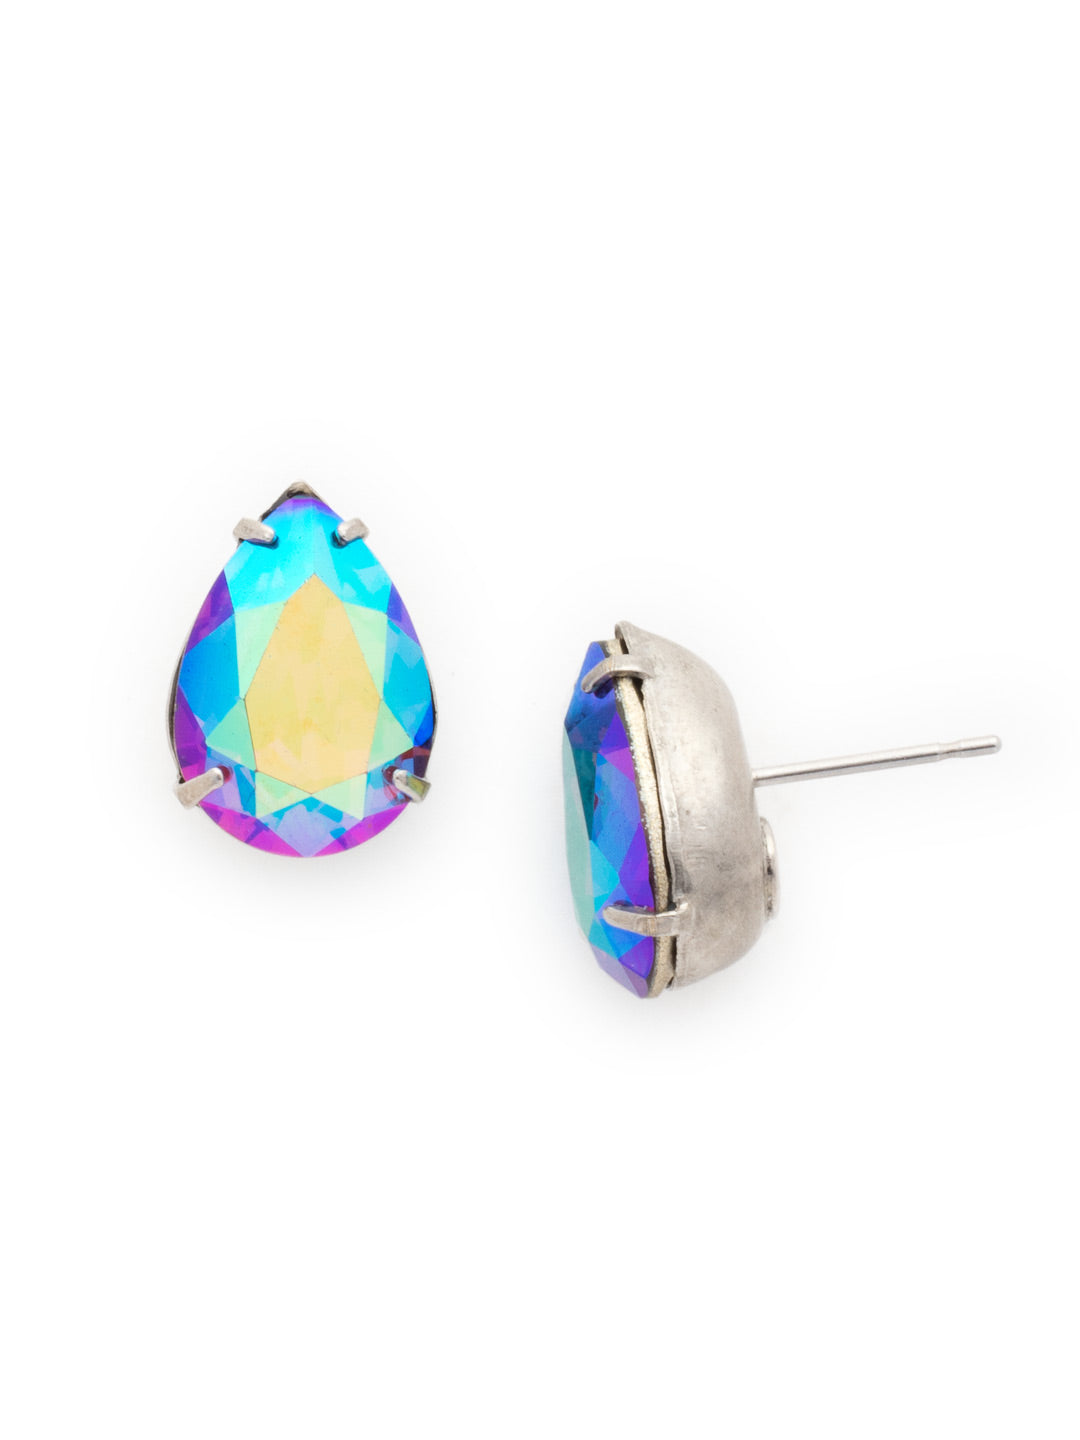 Ginnie Stud Earrings - ECR115ASNL - <p>A beautiful basic stud. These classic single teardrop post earrings are perfect for any occasion, especially the everyday look. A timeless treasure that will sparkle season after season. From Sorrelli's Northern Lights collection in our Antique Silver-tone finish.</p>